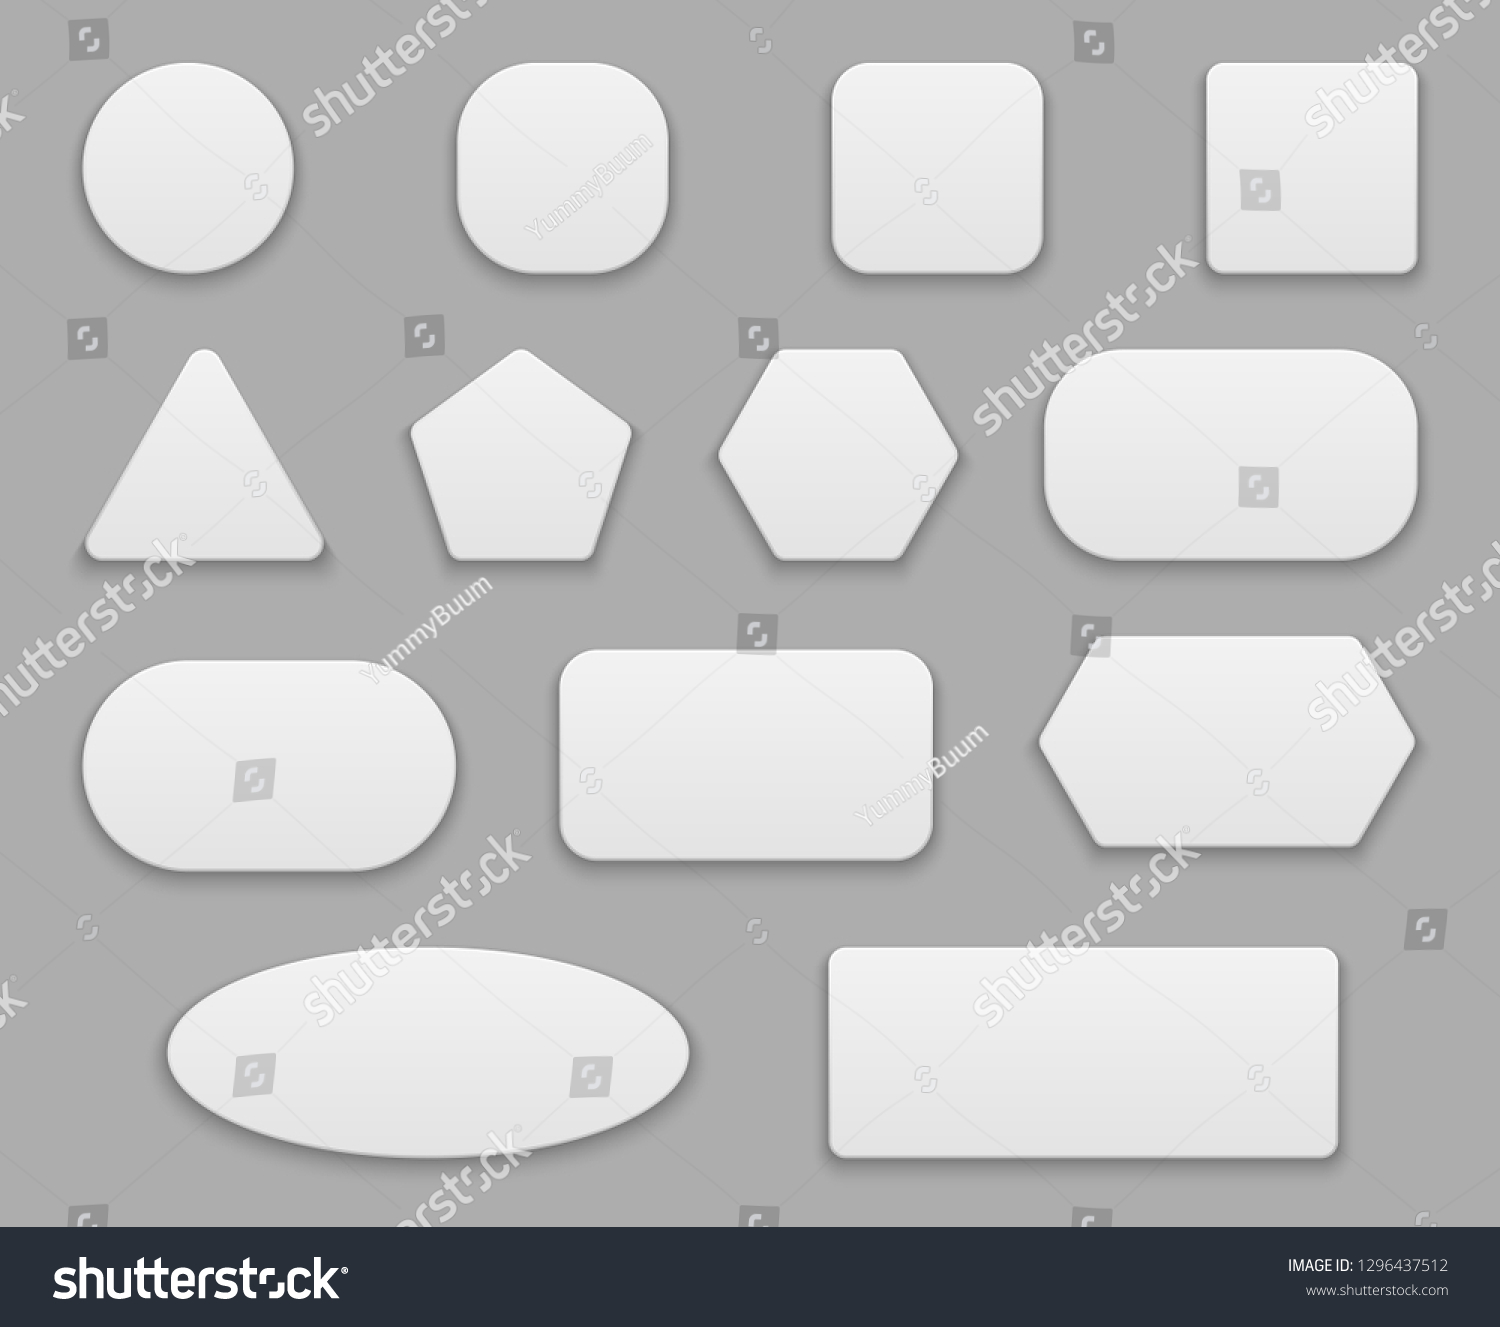 White buttons. Blank tags, white clear badge. Round square circle application button 3d vector isolated shapes #1296437512